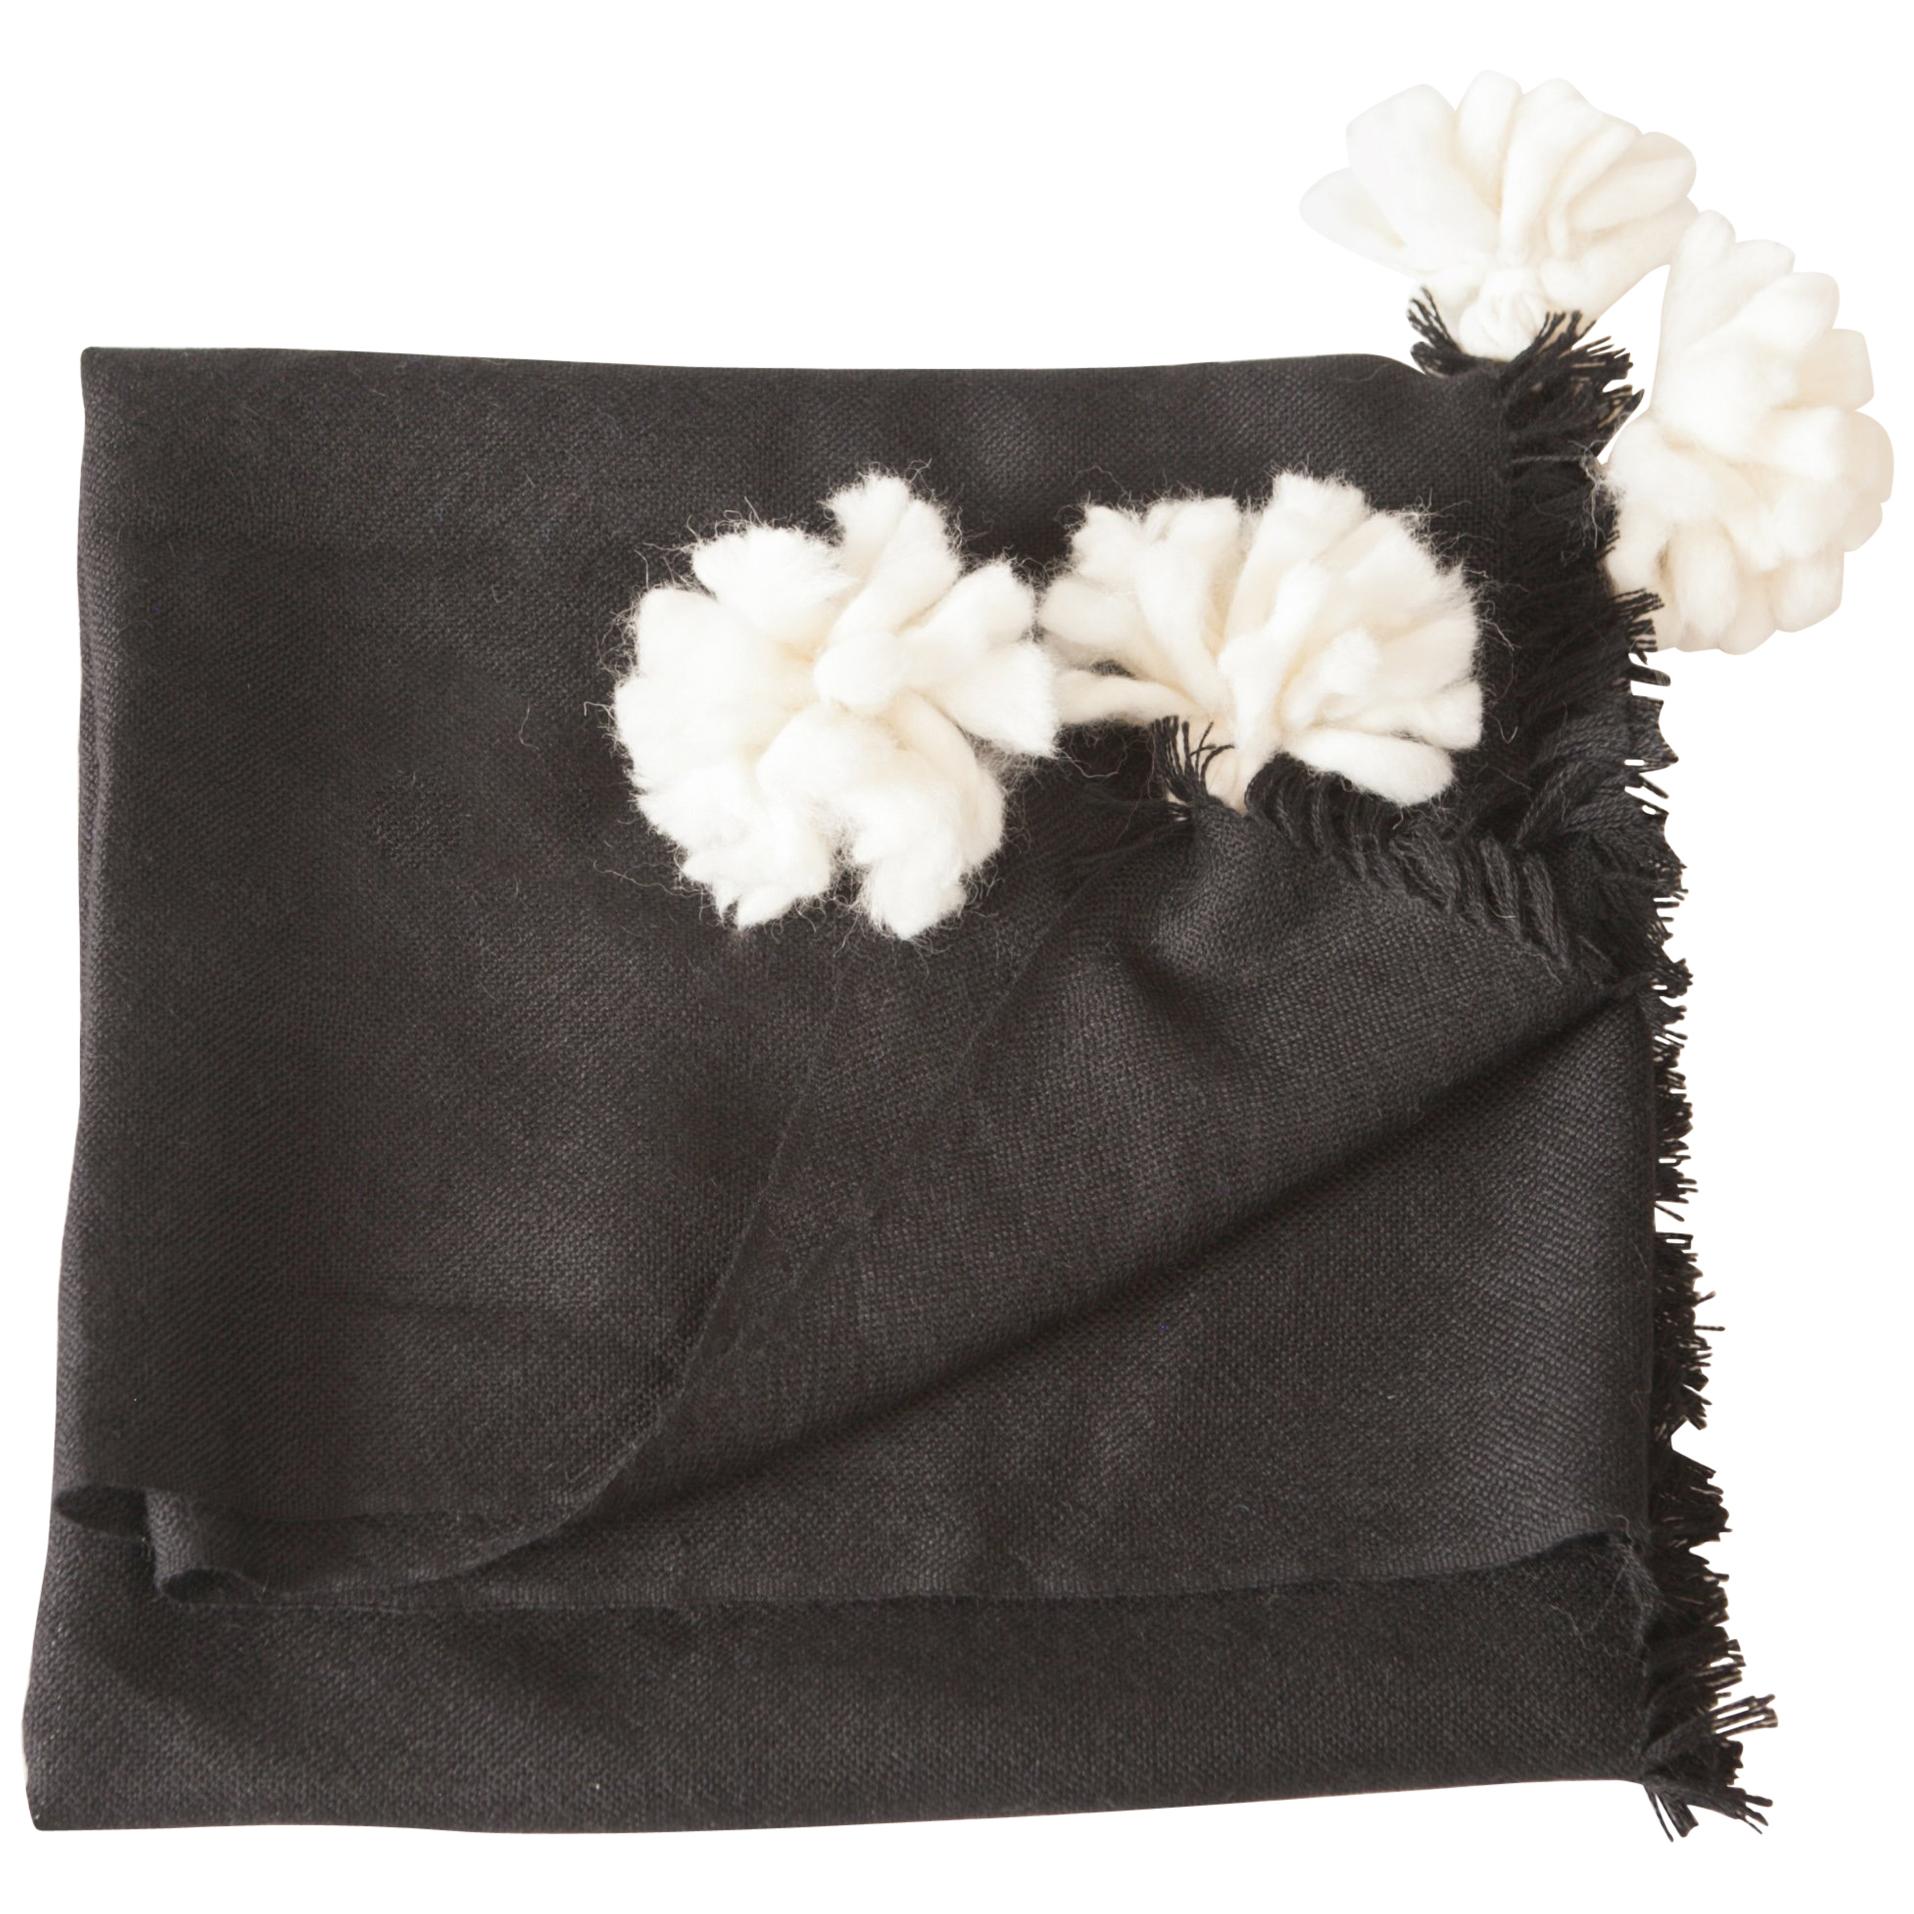 Soft Peruvian Wool Throw in Black, with Natural White Pom Poms, in Stock